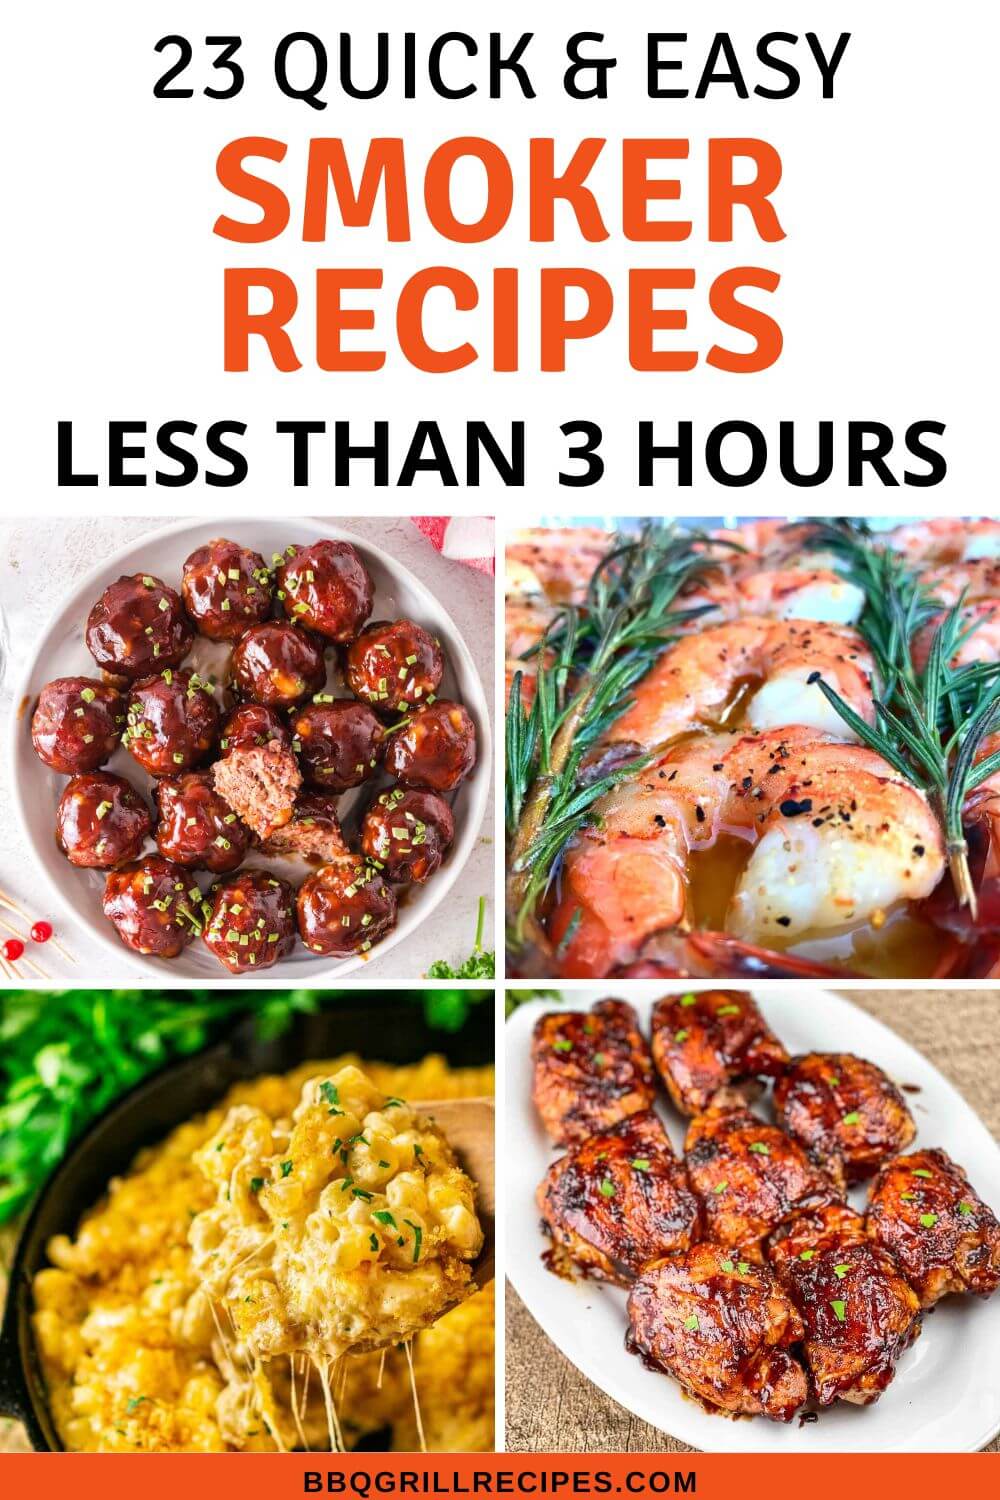 pinterest image - text reads 23 easy & quick smoker recipes less than 3 hours. 